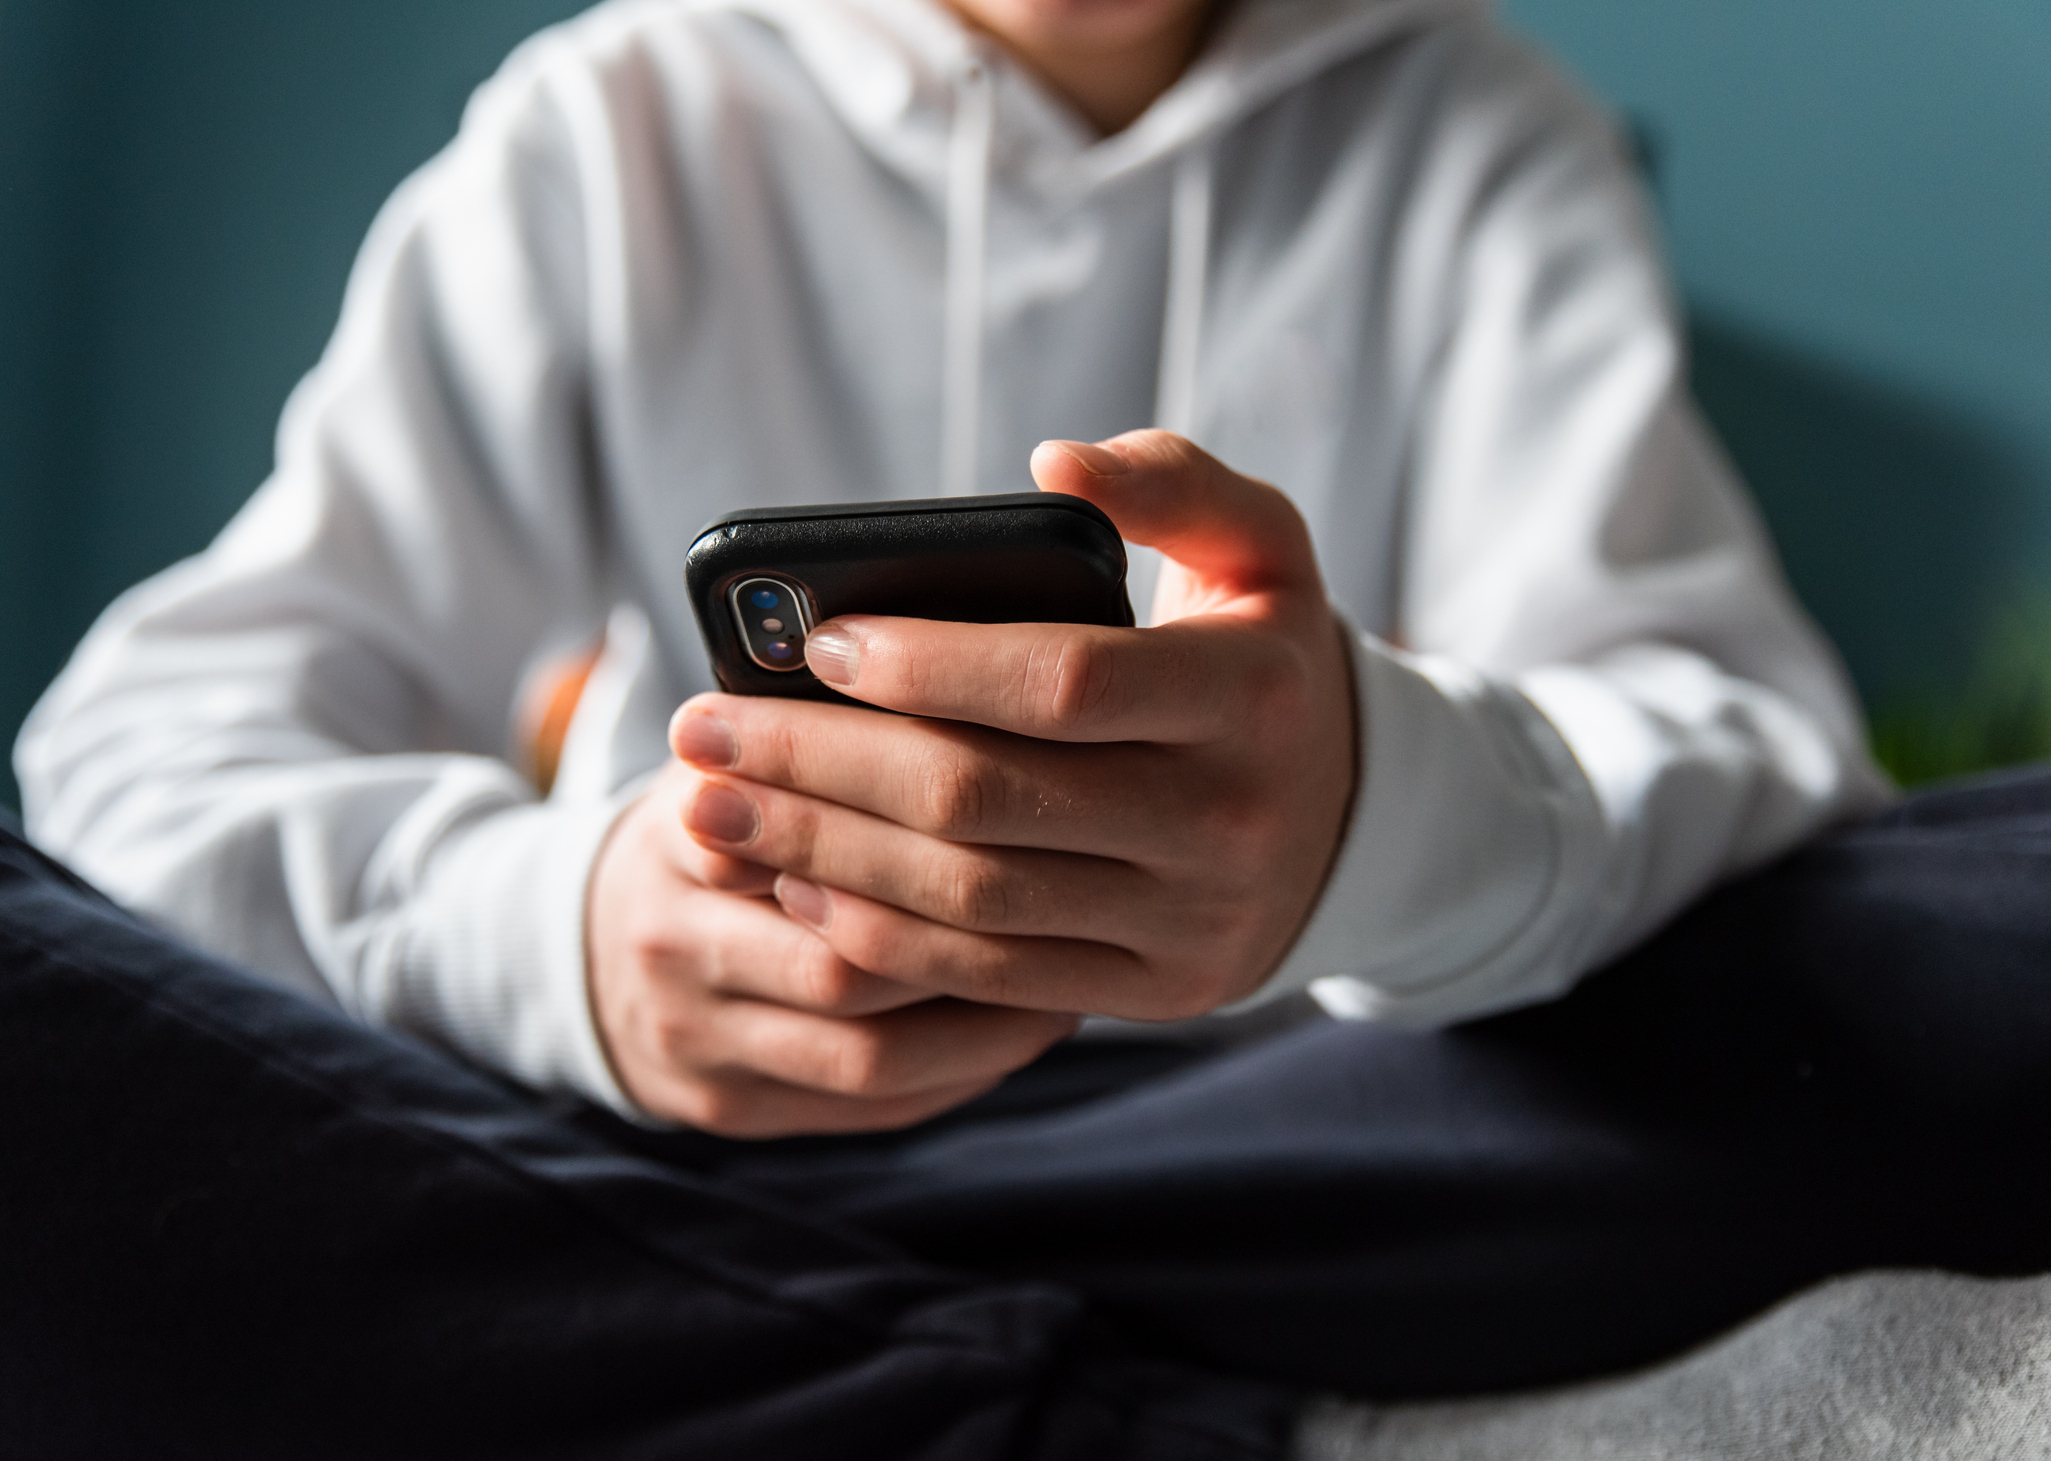 A teen sits holding a smartphone, focusing on the screen, which is not visible to the viewer